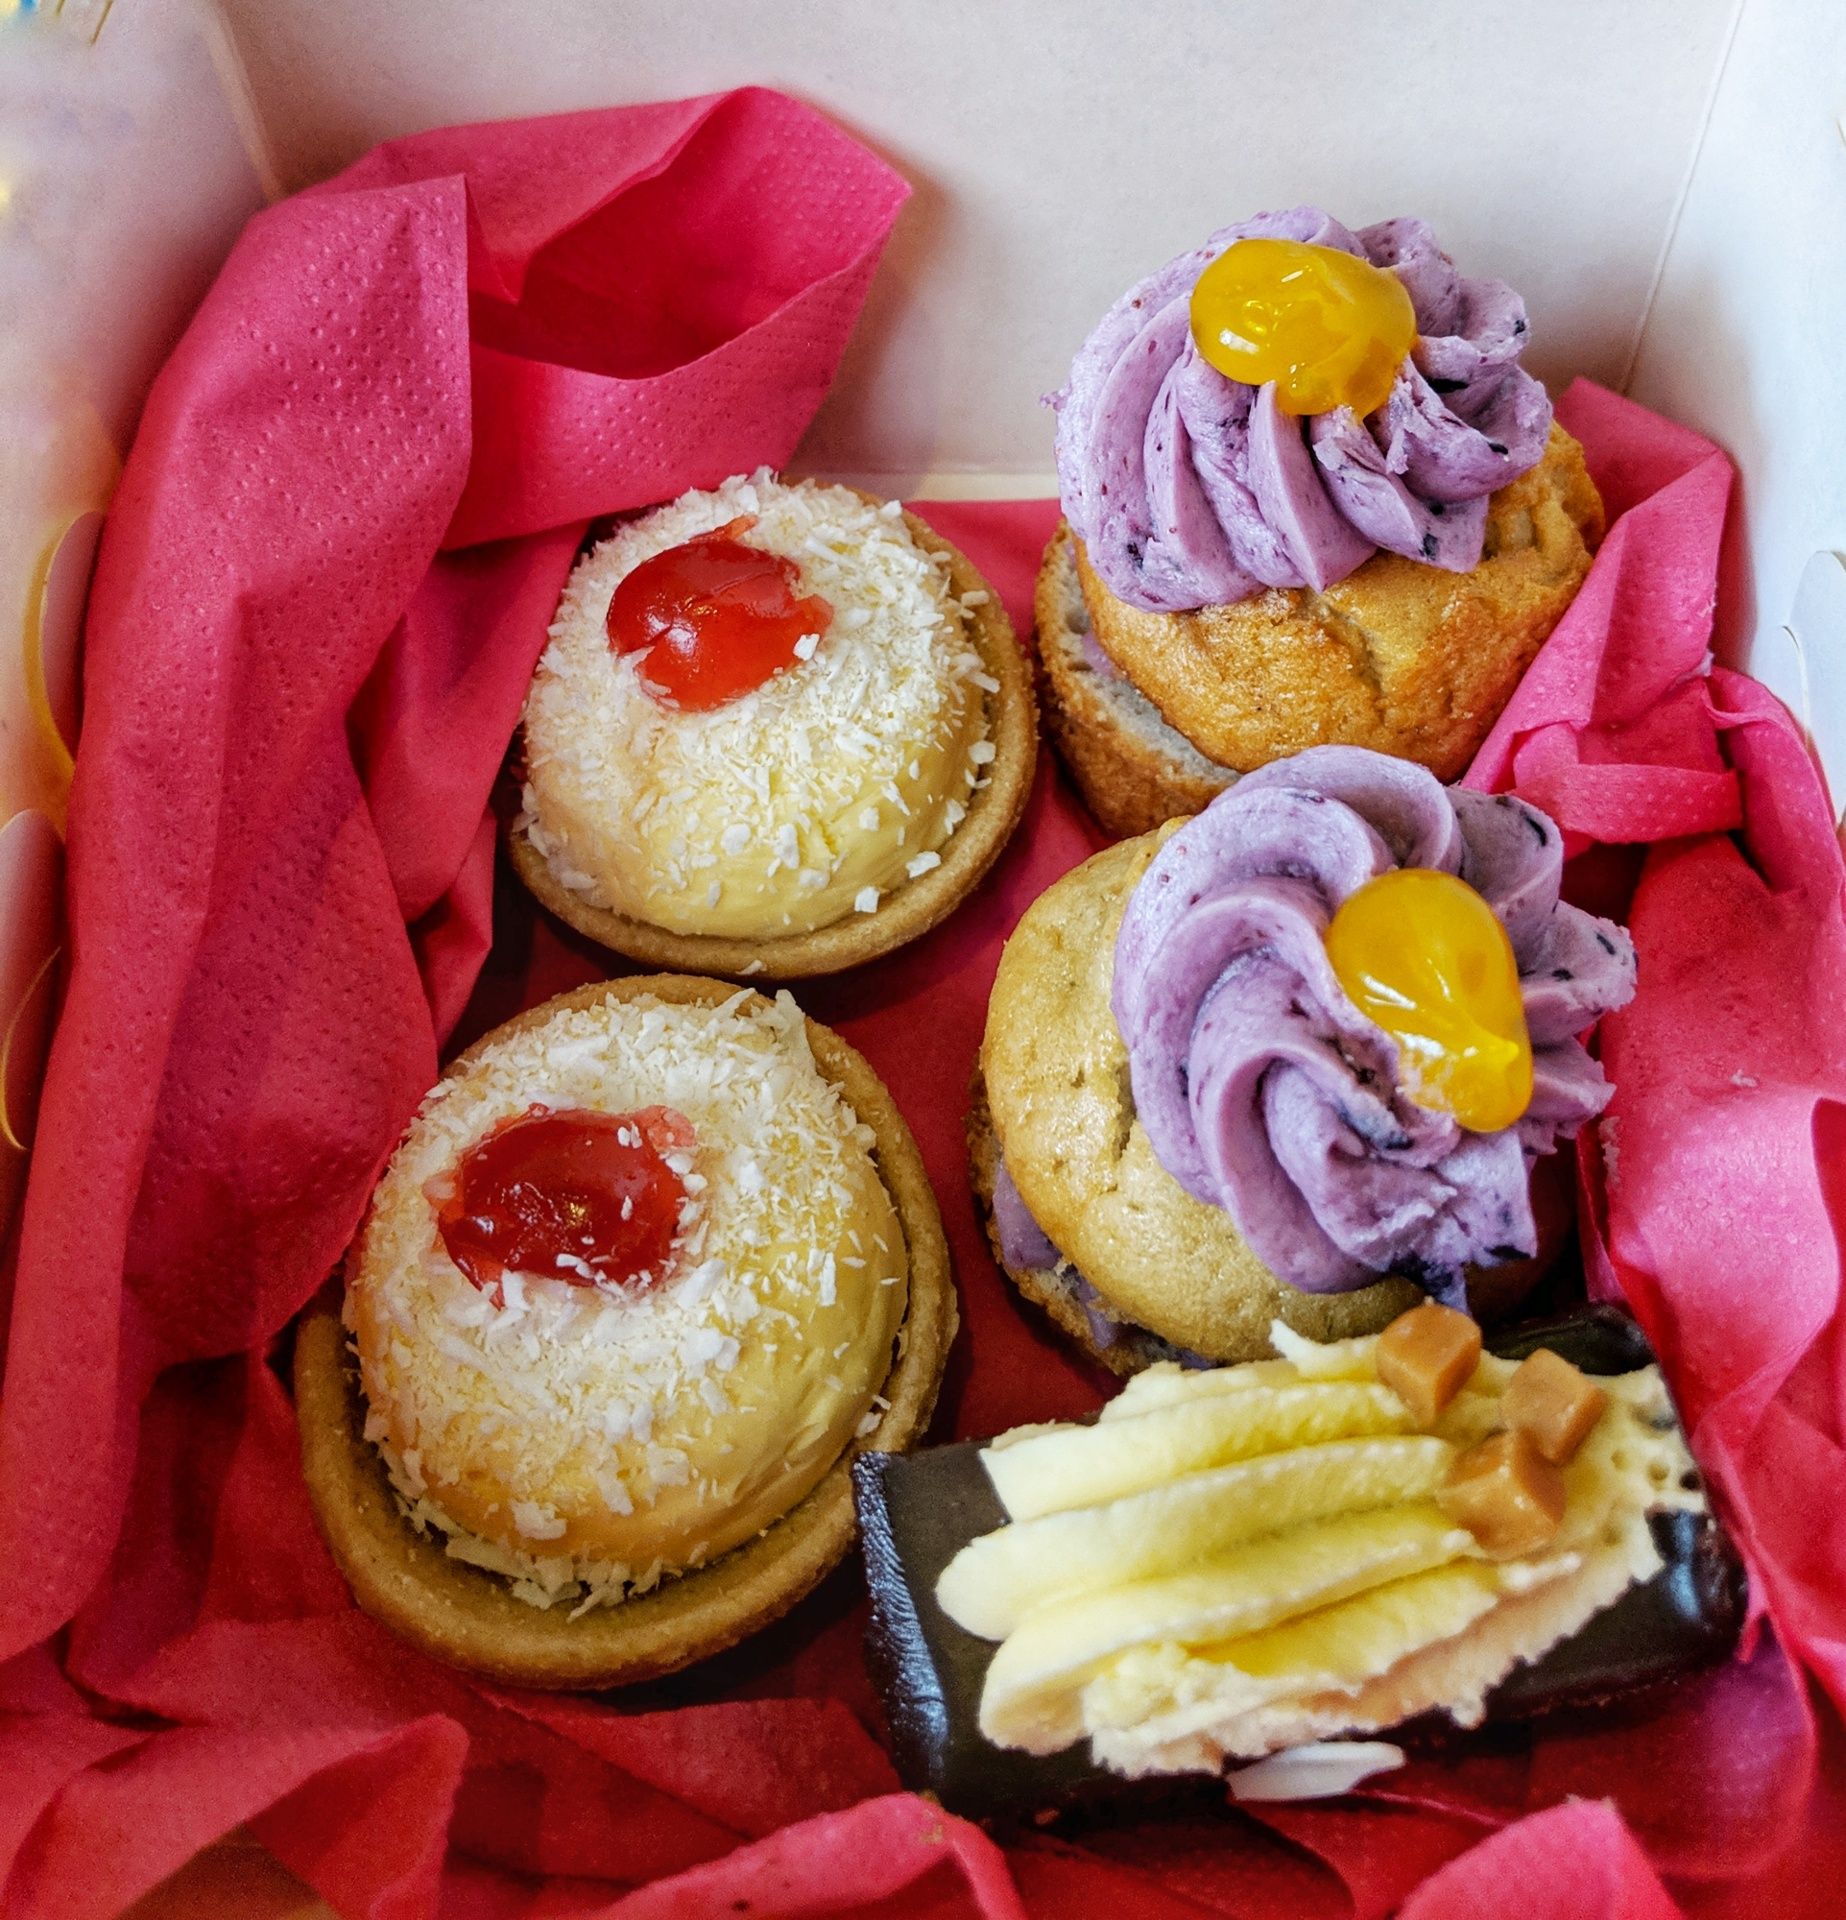 Cakes in a take out box. If you can't finish everything you can ask for it to be boxed up to eat later.